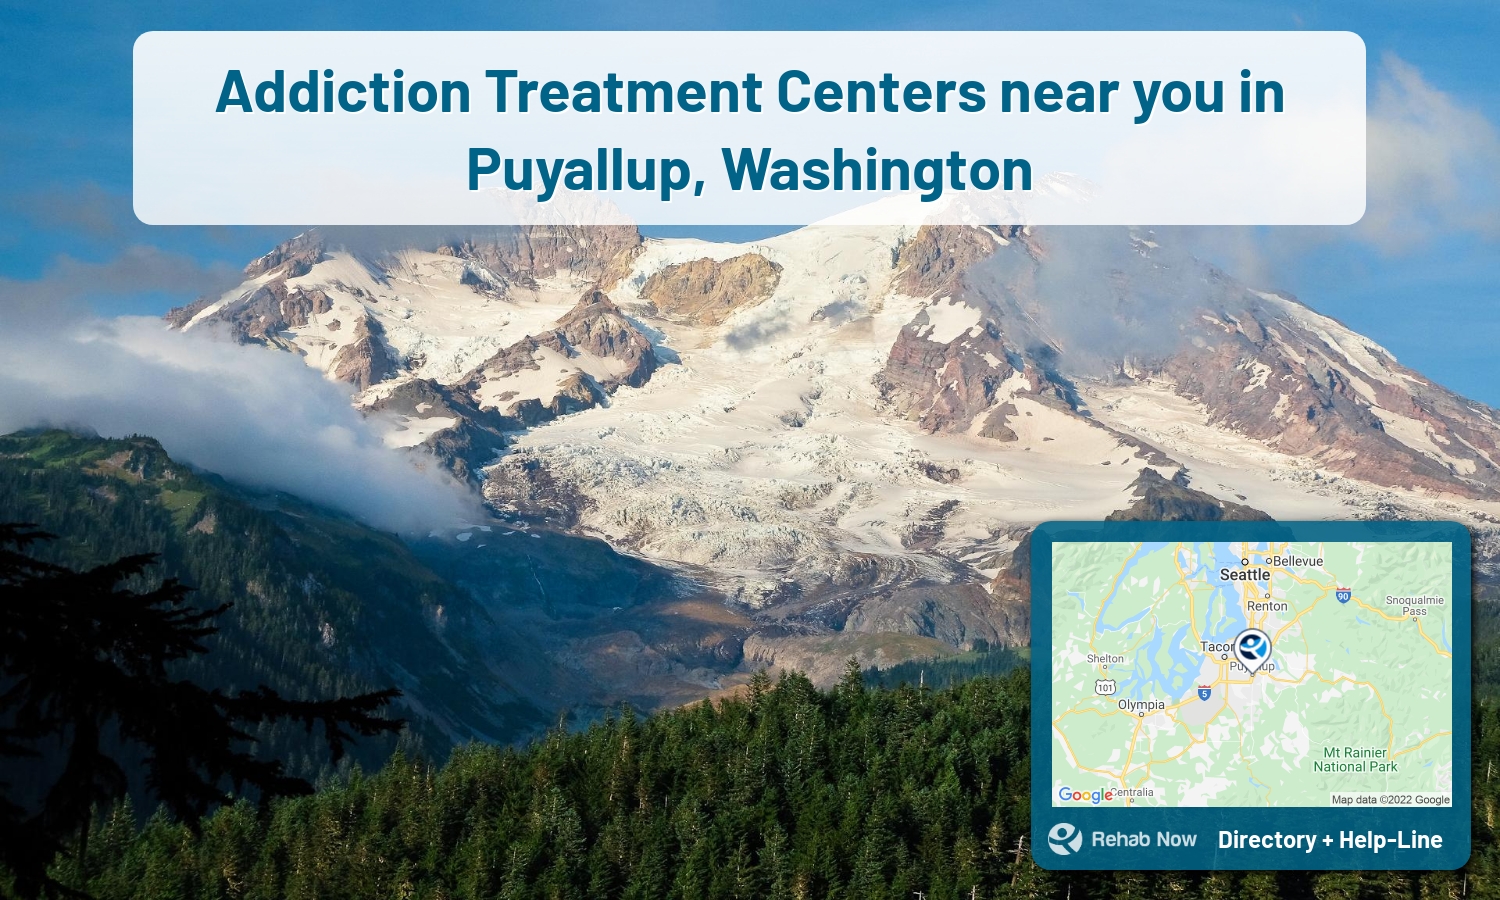 Our experts can help you find treatment now in Puyallup, Washington. We list drug rehab and alcohol centers in Washington.